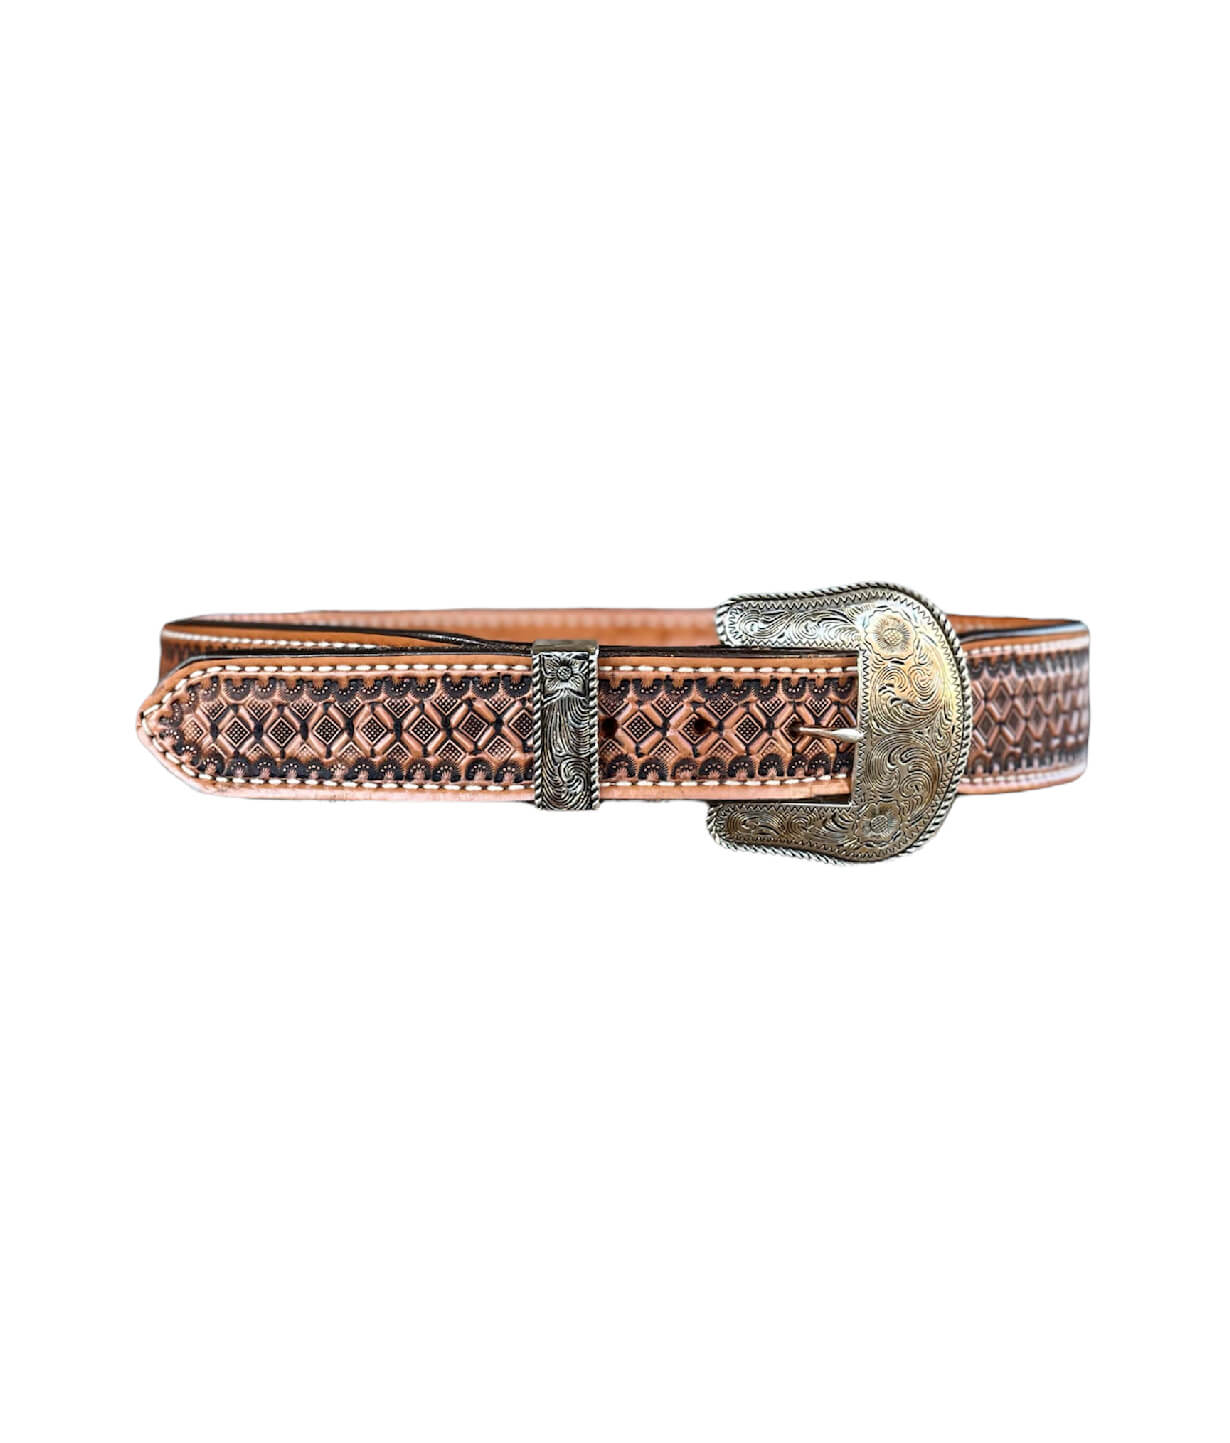 This is our TAPERED golden leather belt with waffle tooling and an antique finish. It comes with a silver belt buckle and silver belt loop.